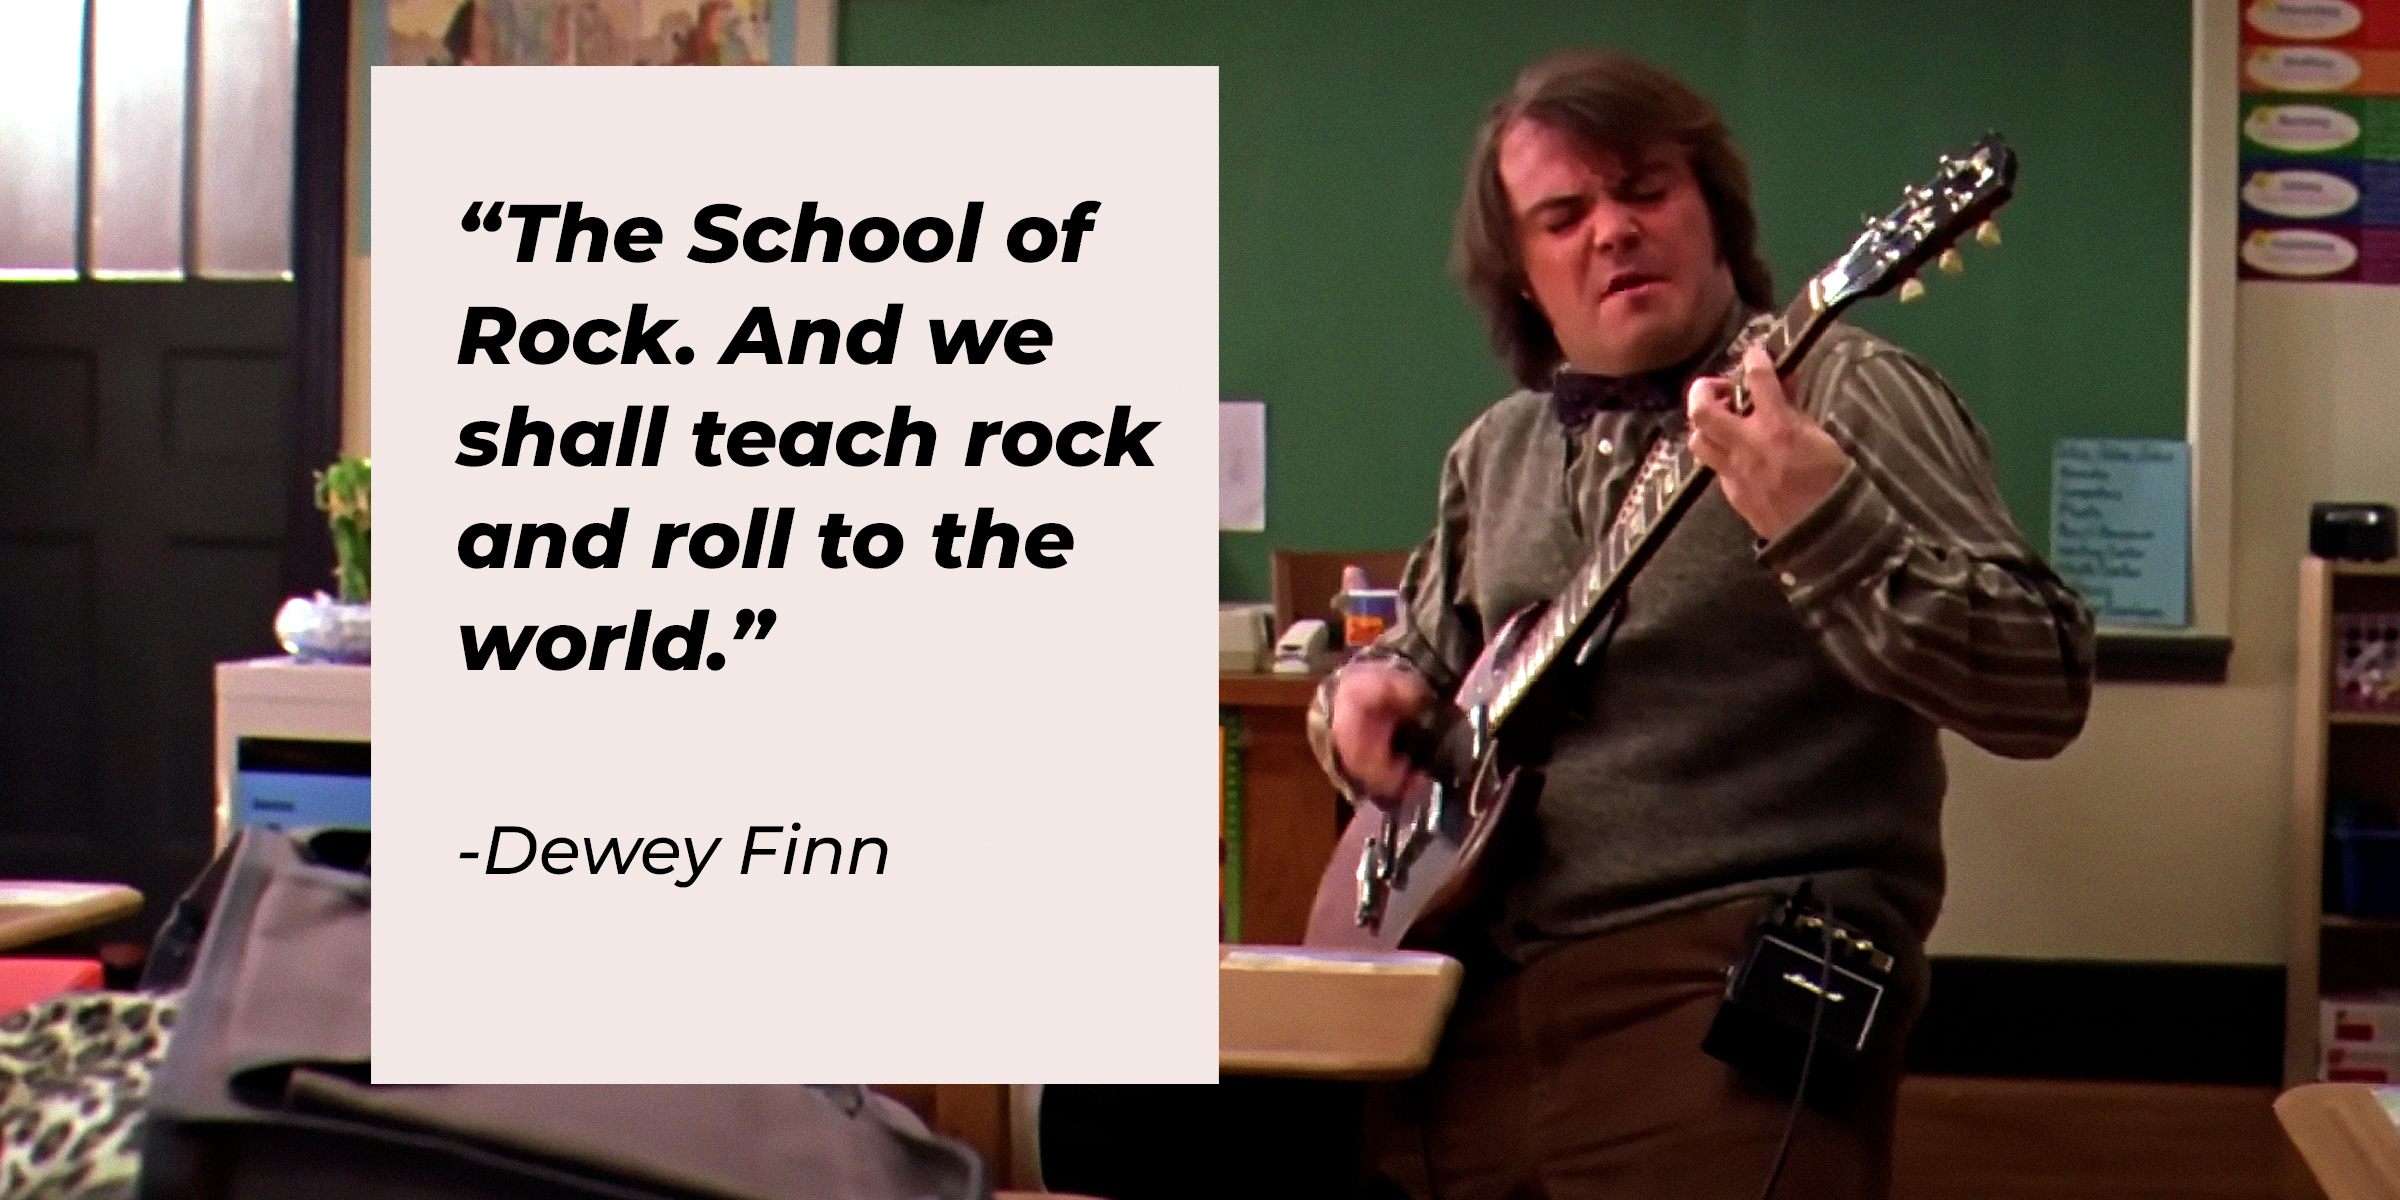 Dewey Finn, with his quote: “The School of Rock. And we shall teach rock and roll to the world.” | Source: youtube.com/paramountpictures